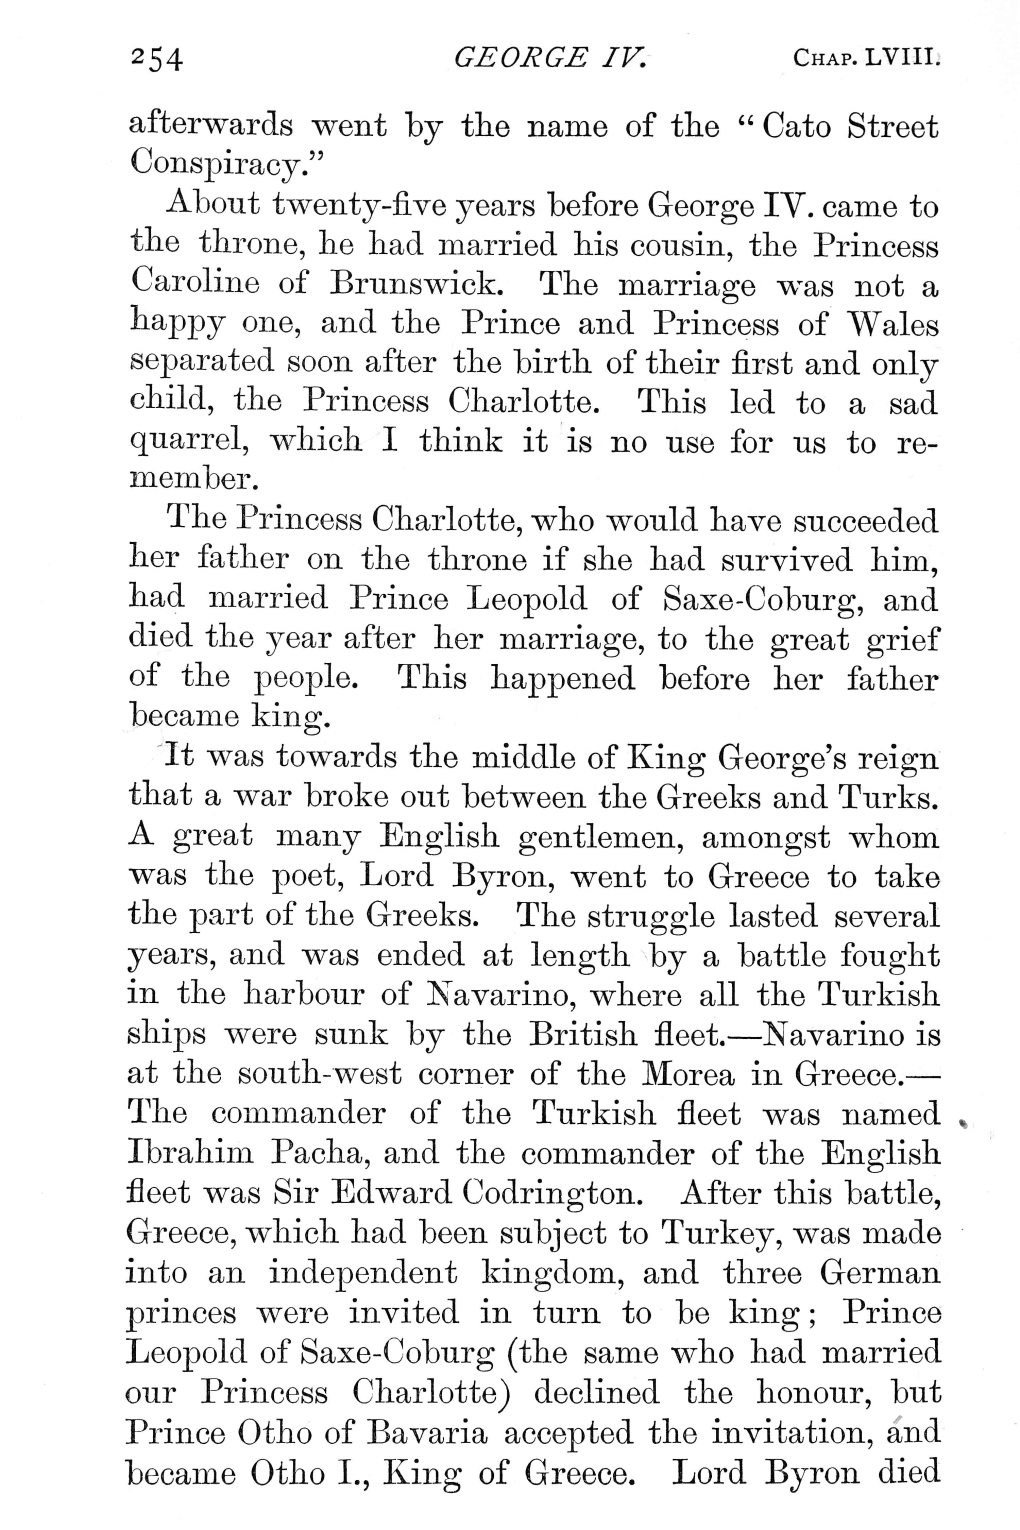 Afterwards Went by the Name of the "Cato Street Conspiracy." About Twenty-Five Years Before George IV